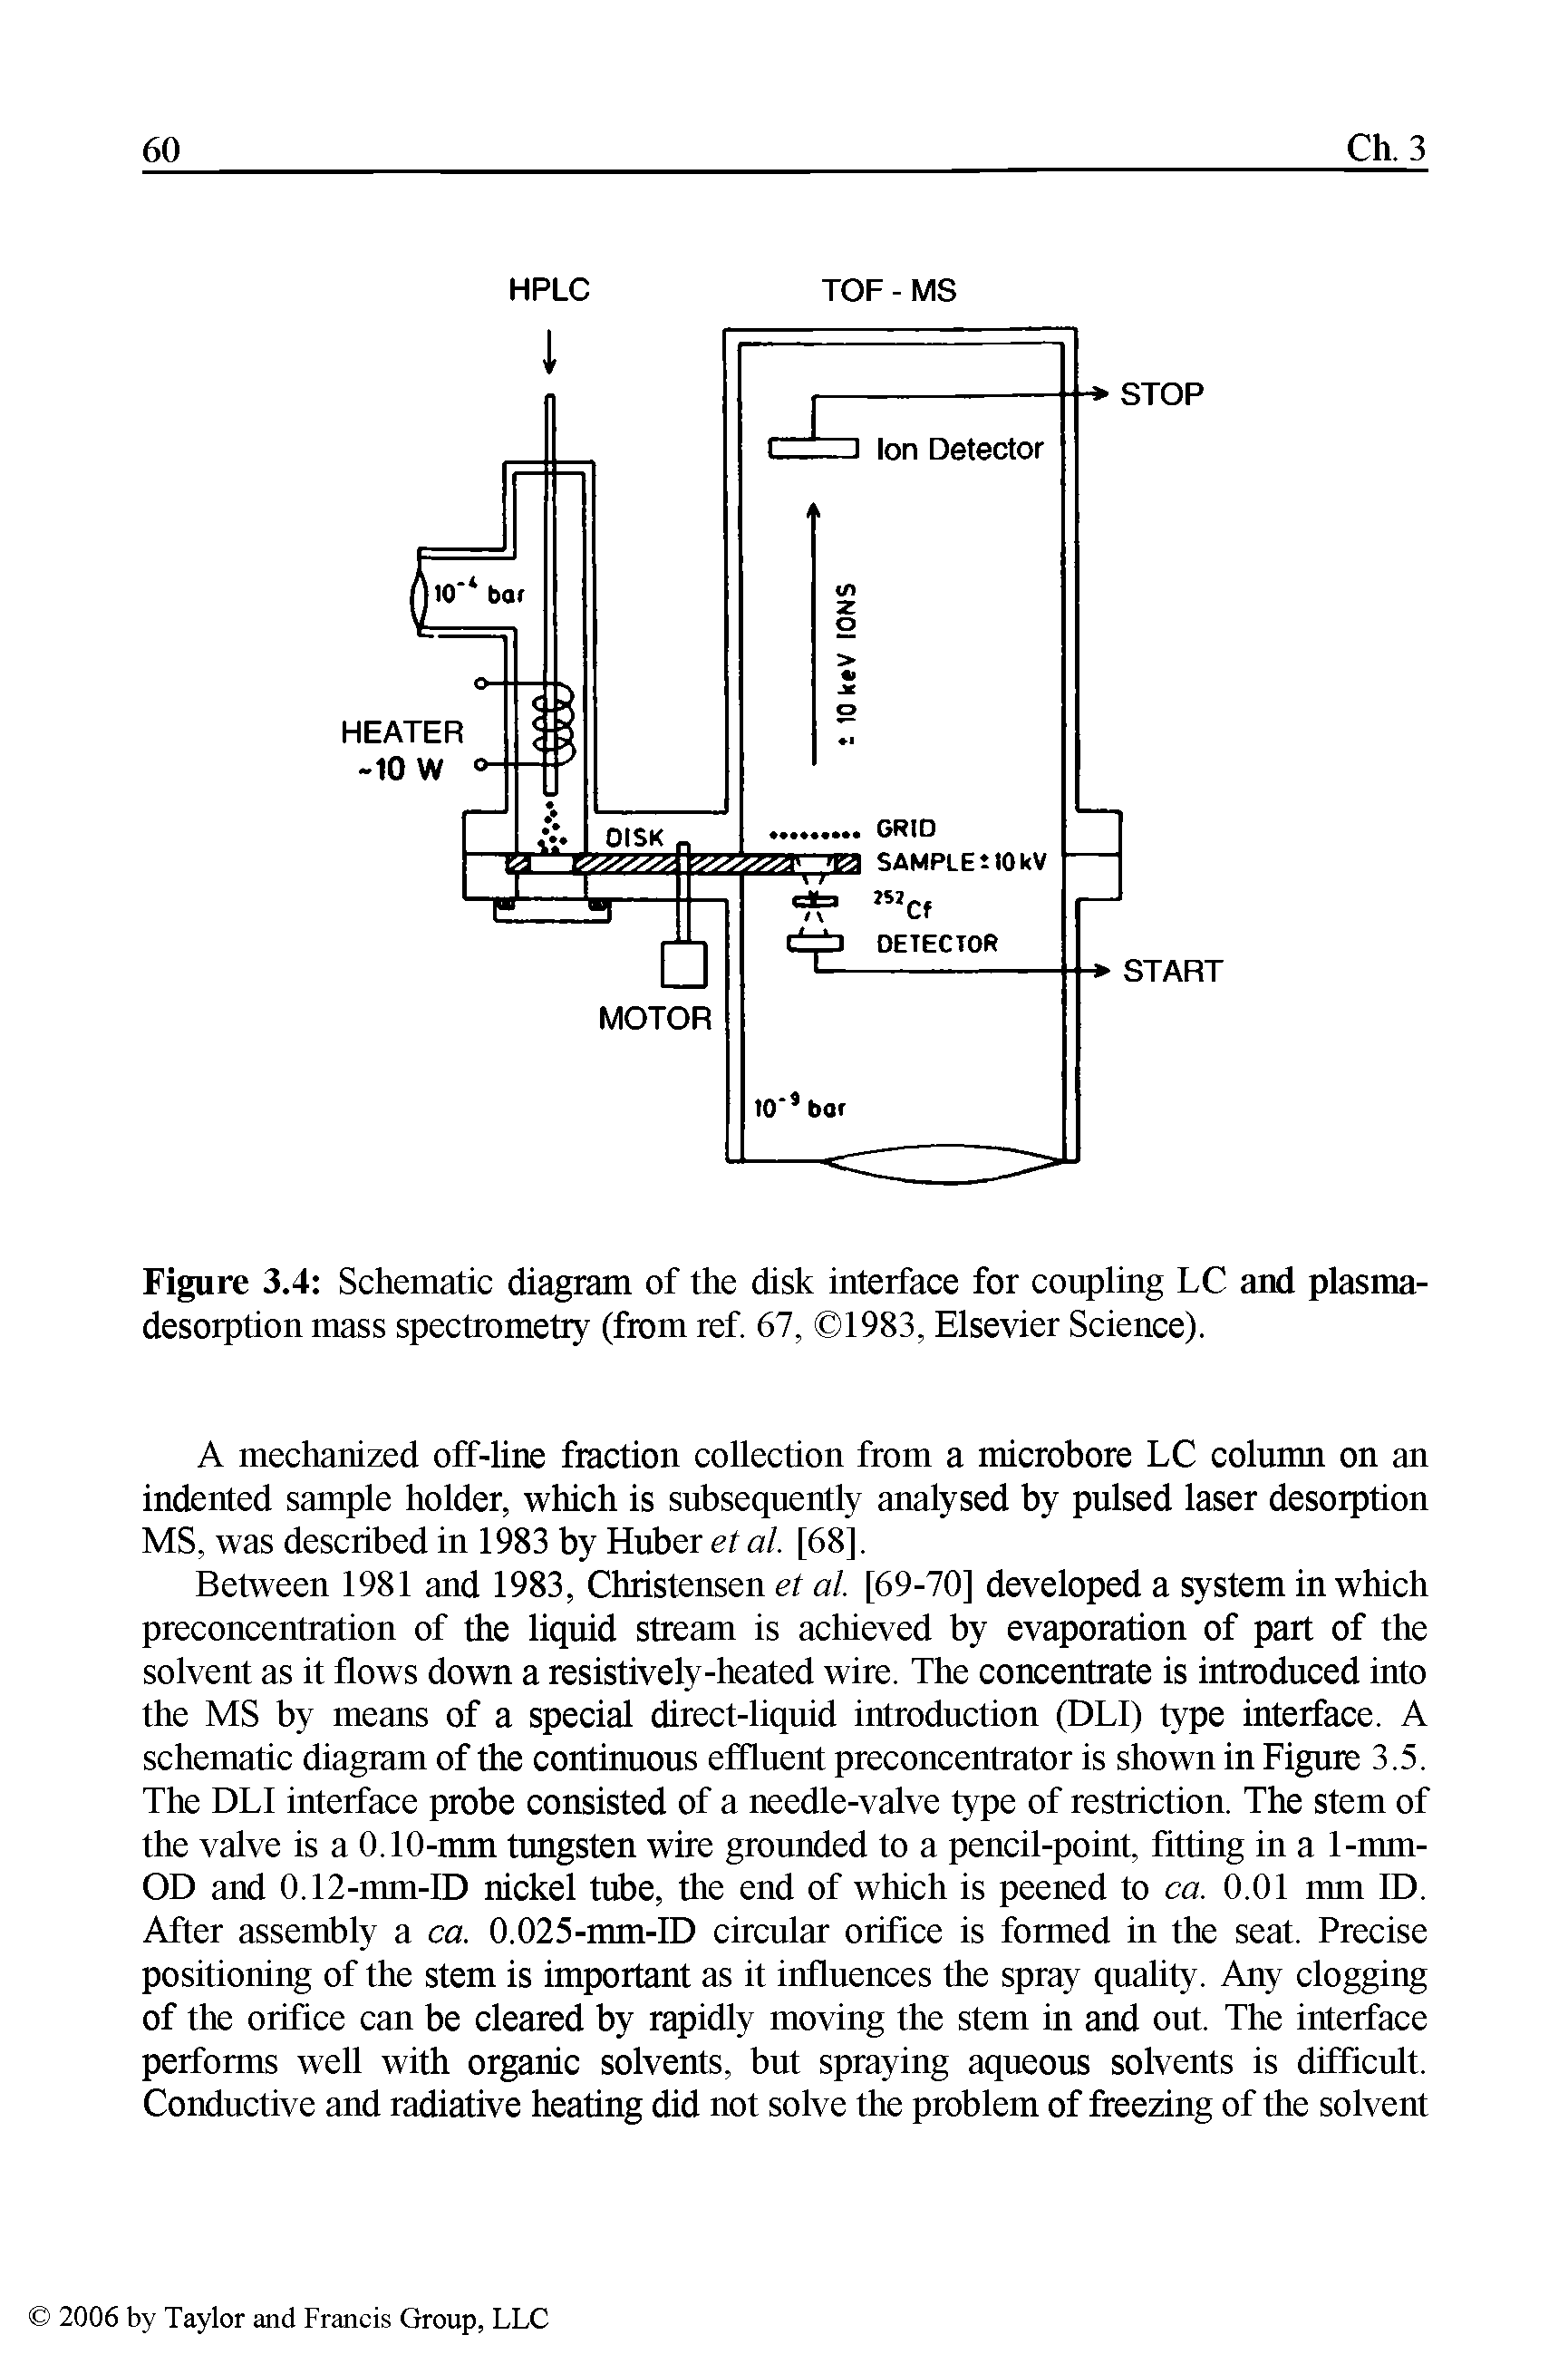 Figure 3.4 Schematic diagram of the disk interface for coupling LC and plasma-desorption mass spectrometry (from ref 67, 1983, Elsevier Science).